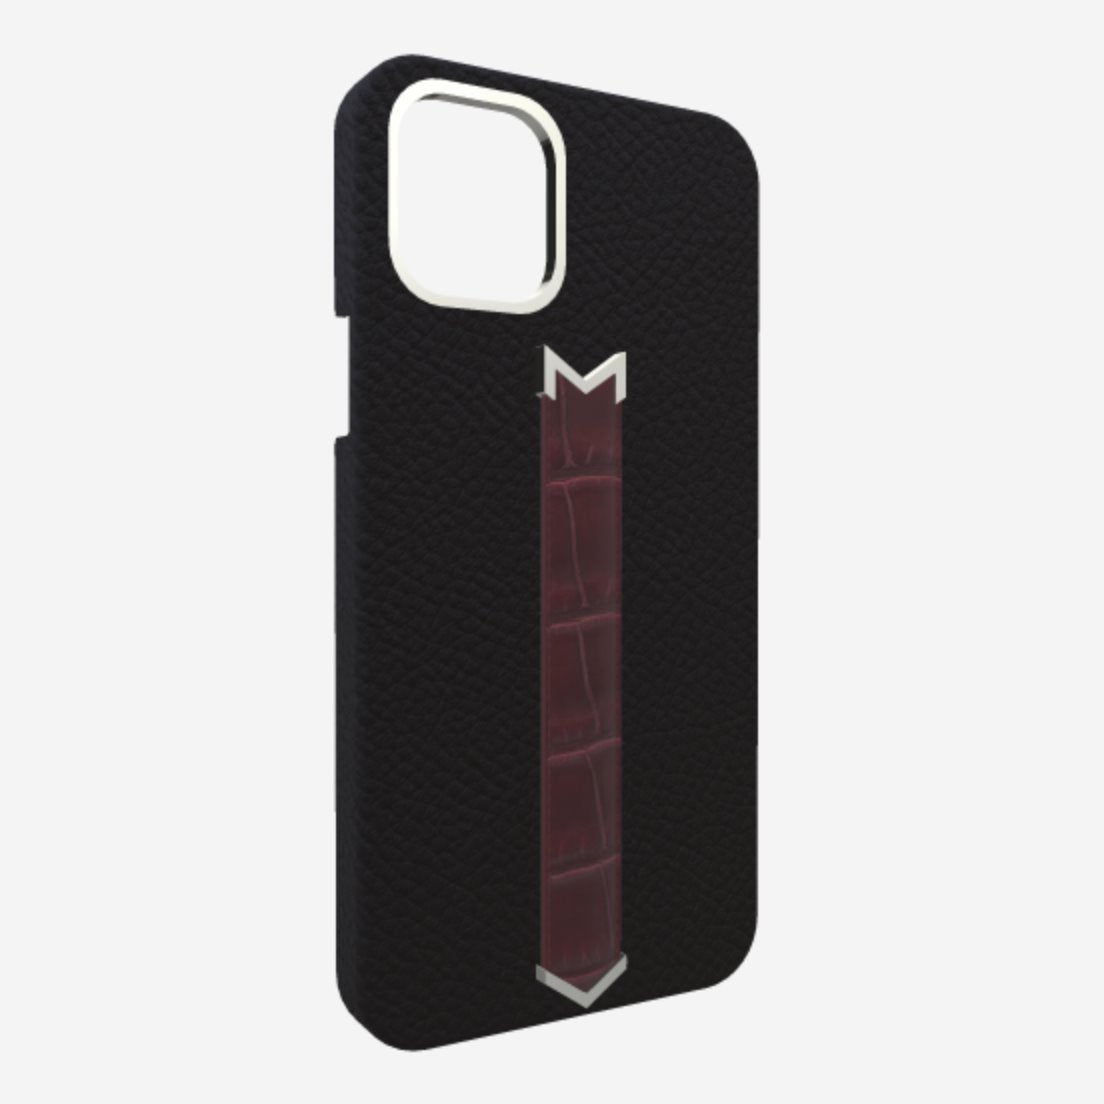 Silver Finger Strap Case for iPhone 13 Pro Max in Genuine Calfskin and Alligator Bond-Black Burgundy-Palace 